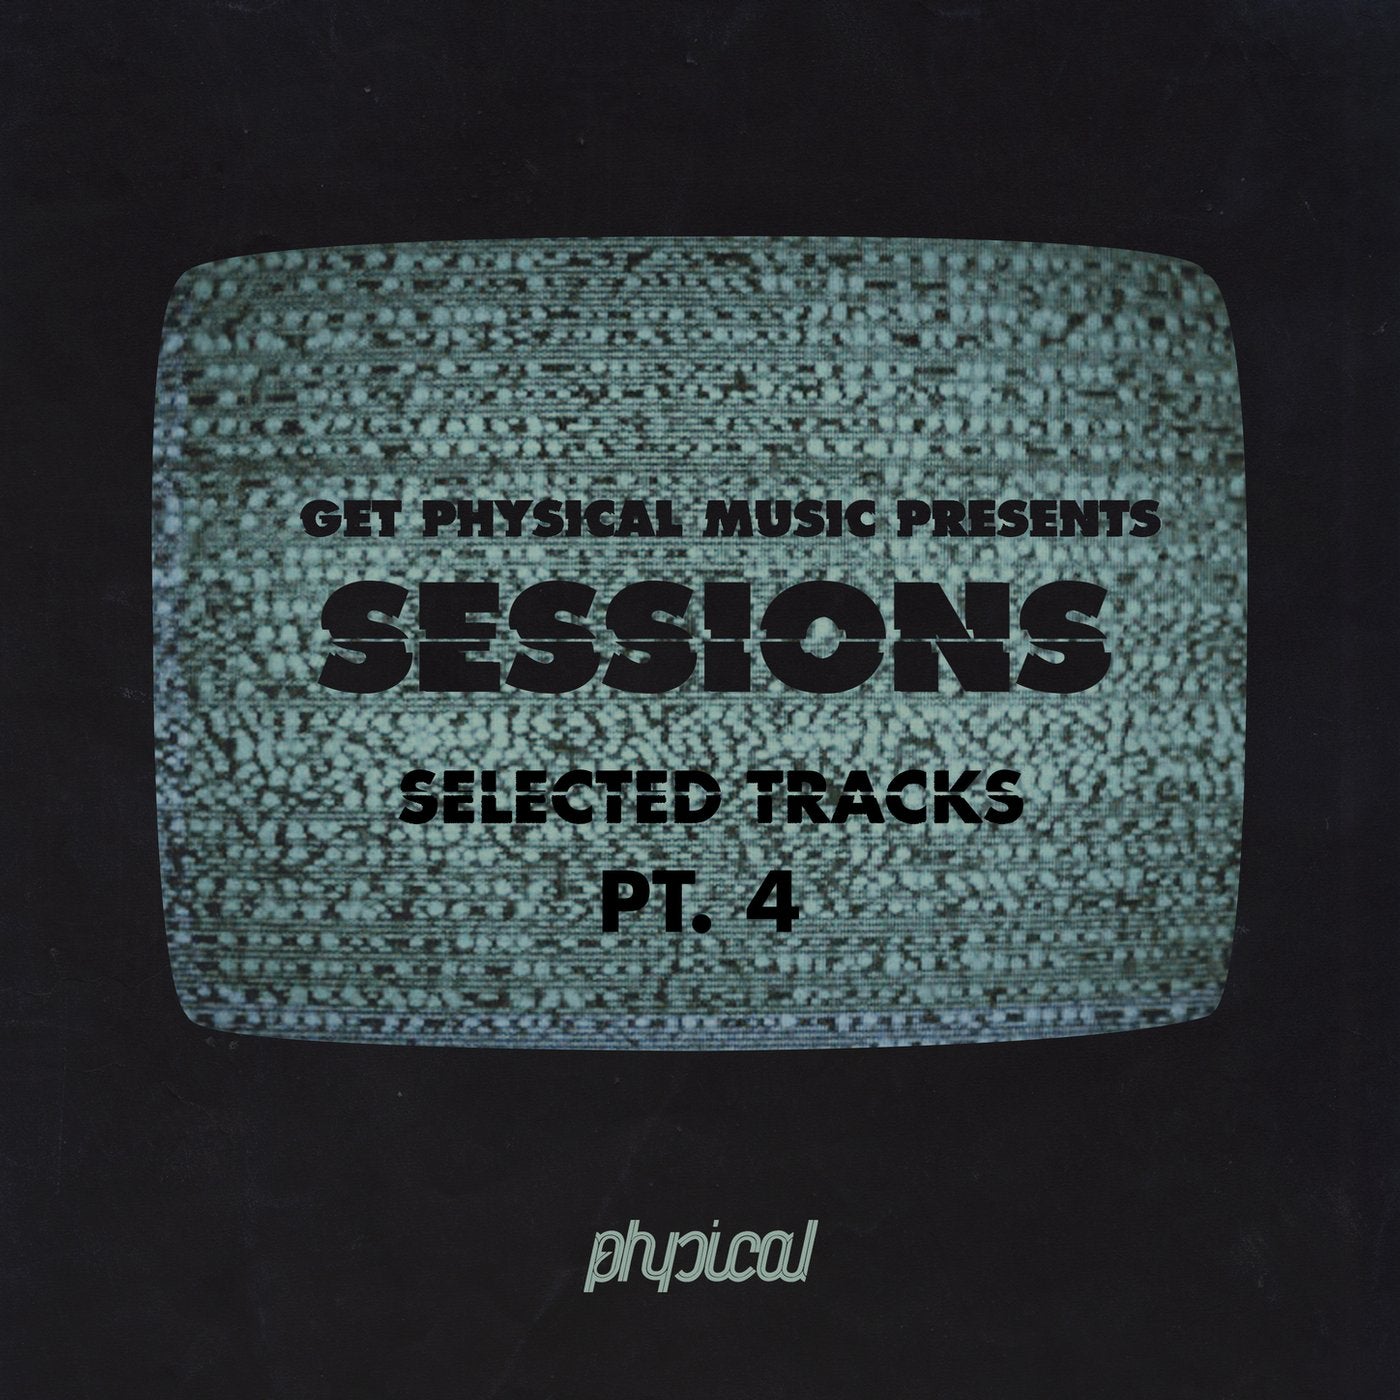 Get physical. Selected tracks. Select tracks